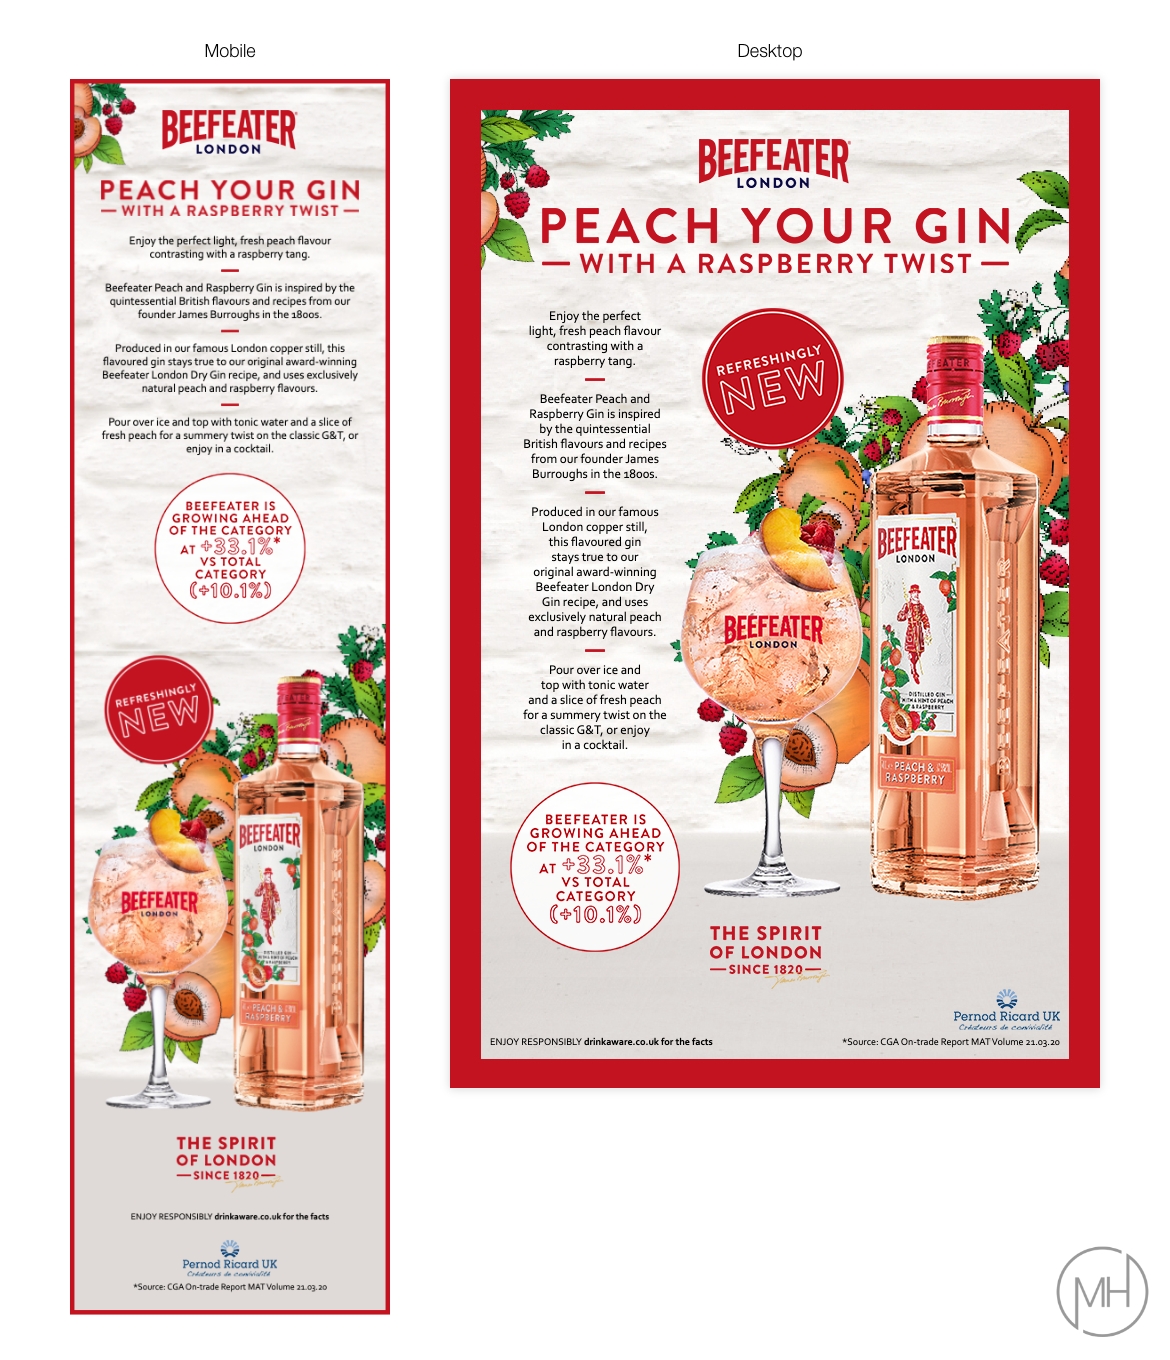 Beefeater email development